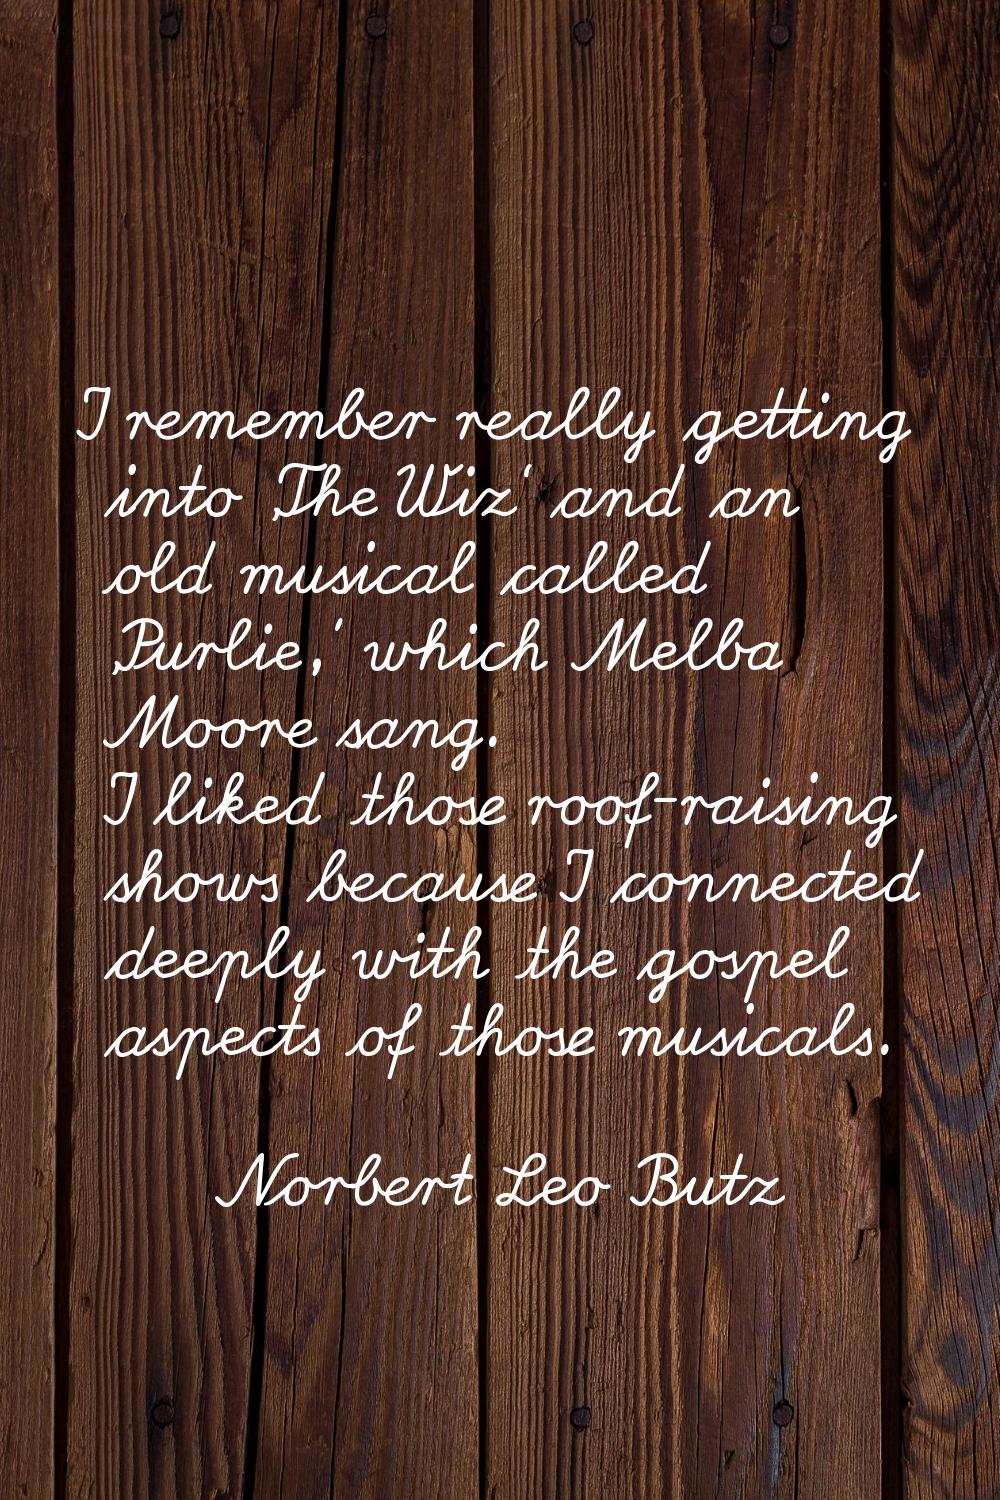 I remember really getting into 'The Wiz' and an old musical called 'Purlie,' which Melba Moore sang